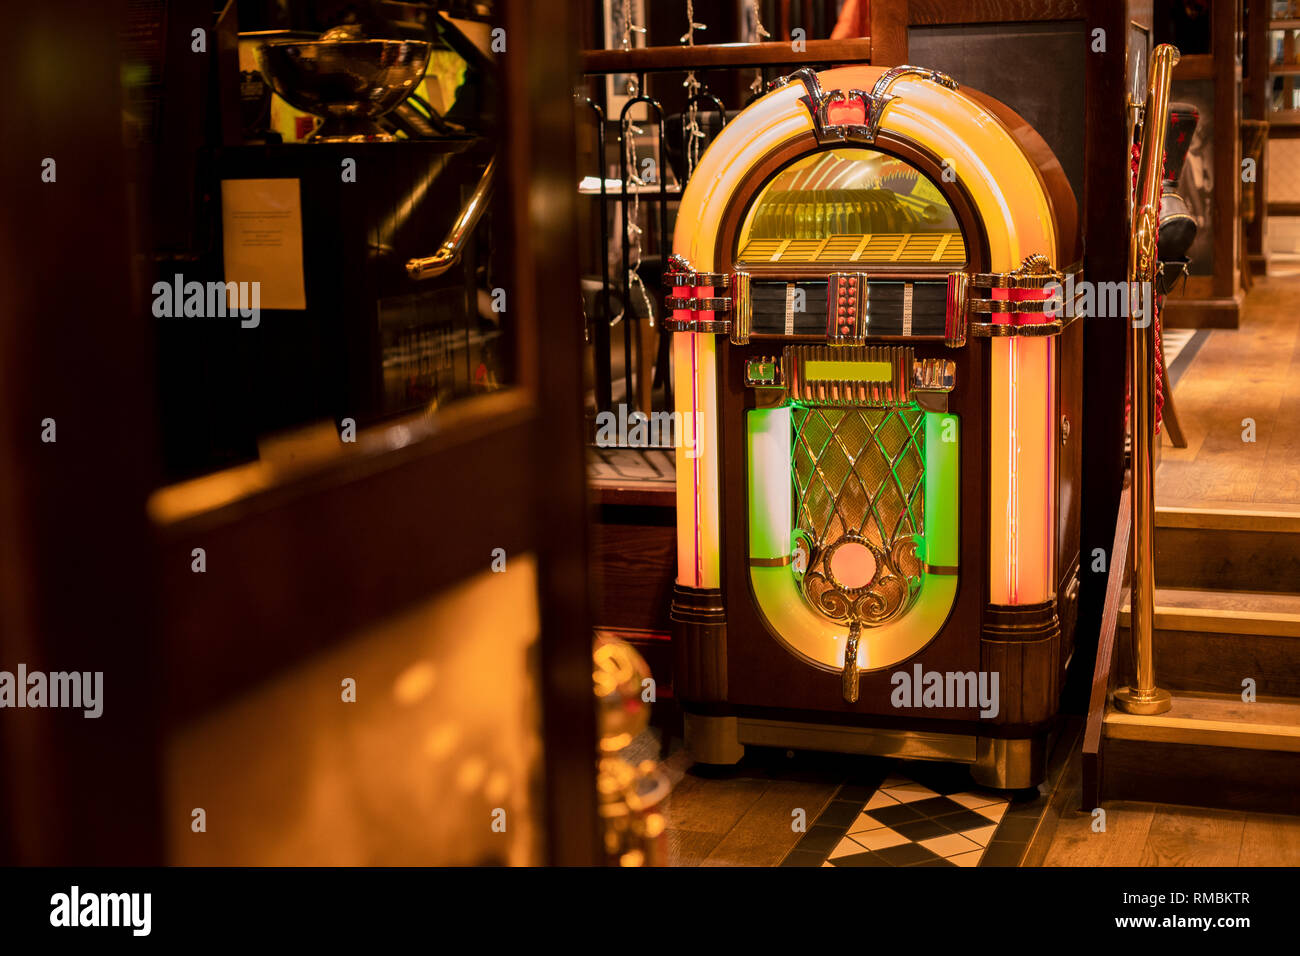 Retro jukebox in the corner of a restaurant by a set of stairs. Stock Photo